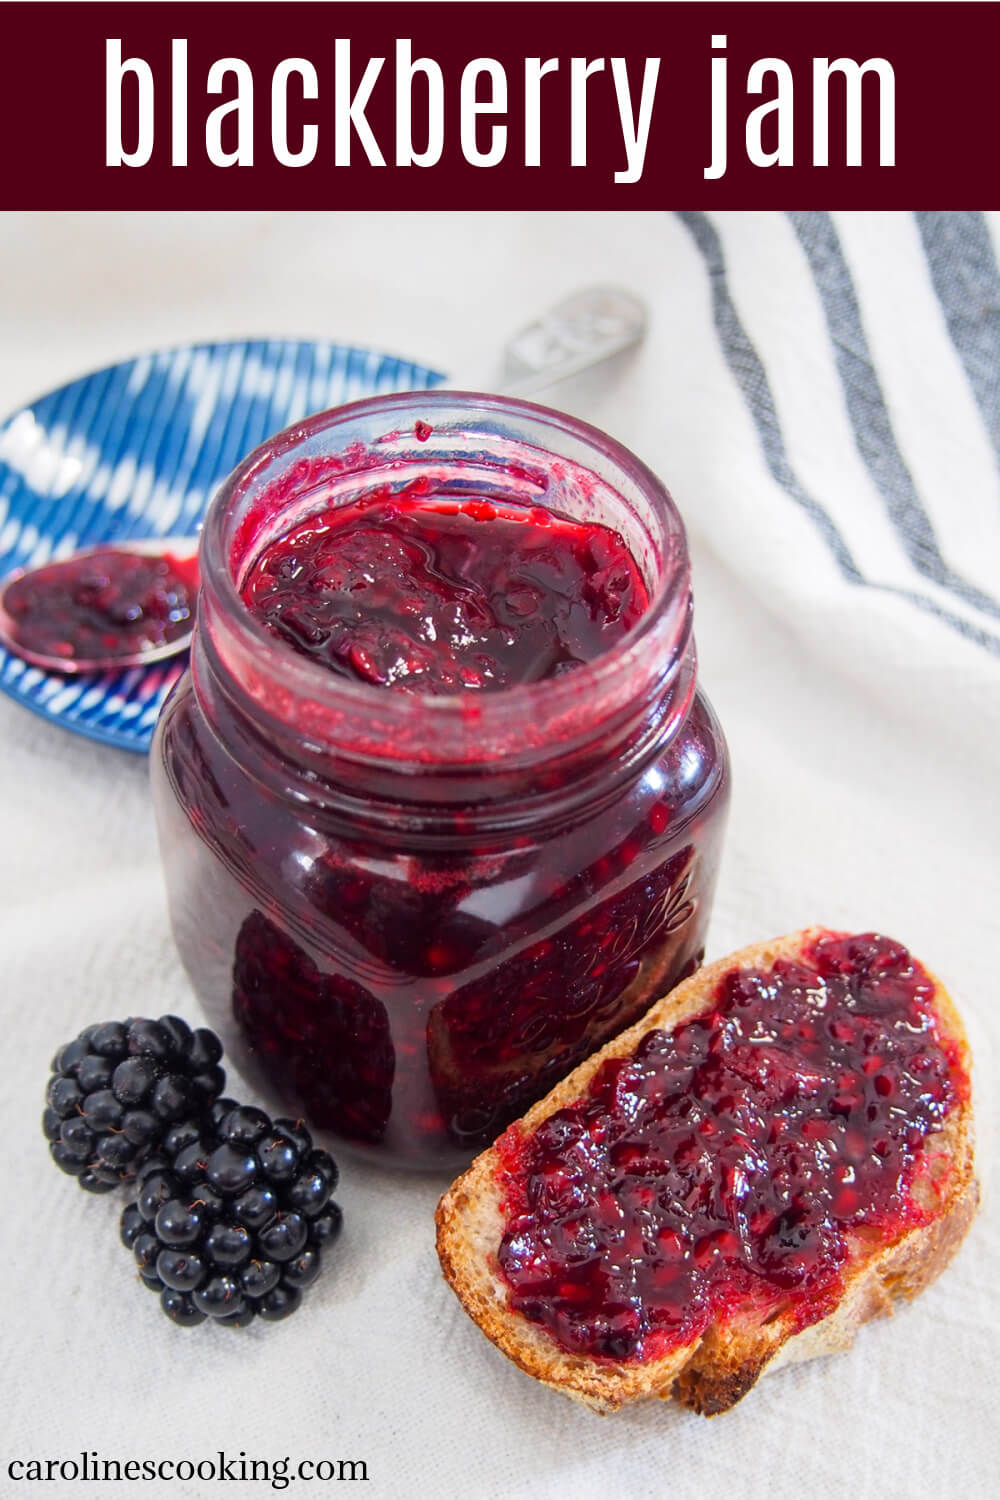 Blackberry jam is brightly colored and bursting with fruity flavor.  This one is made in a small batch with lower sugar and comes together quickly for a delicious spread, perfect for toast and more.  #jam #preserving #blackberry